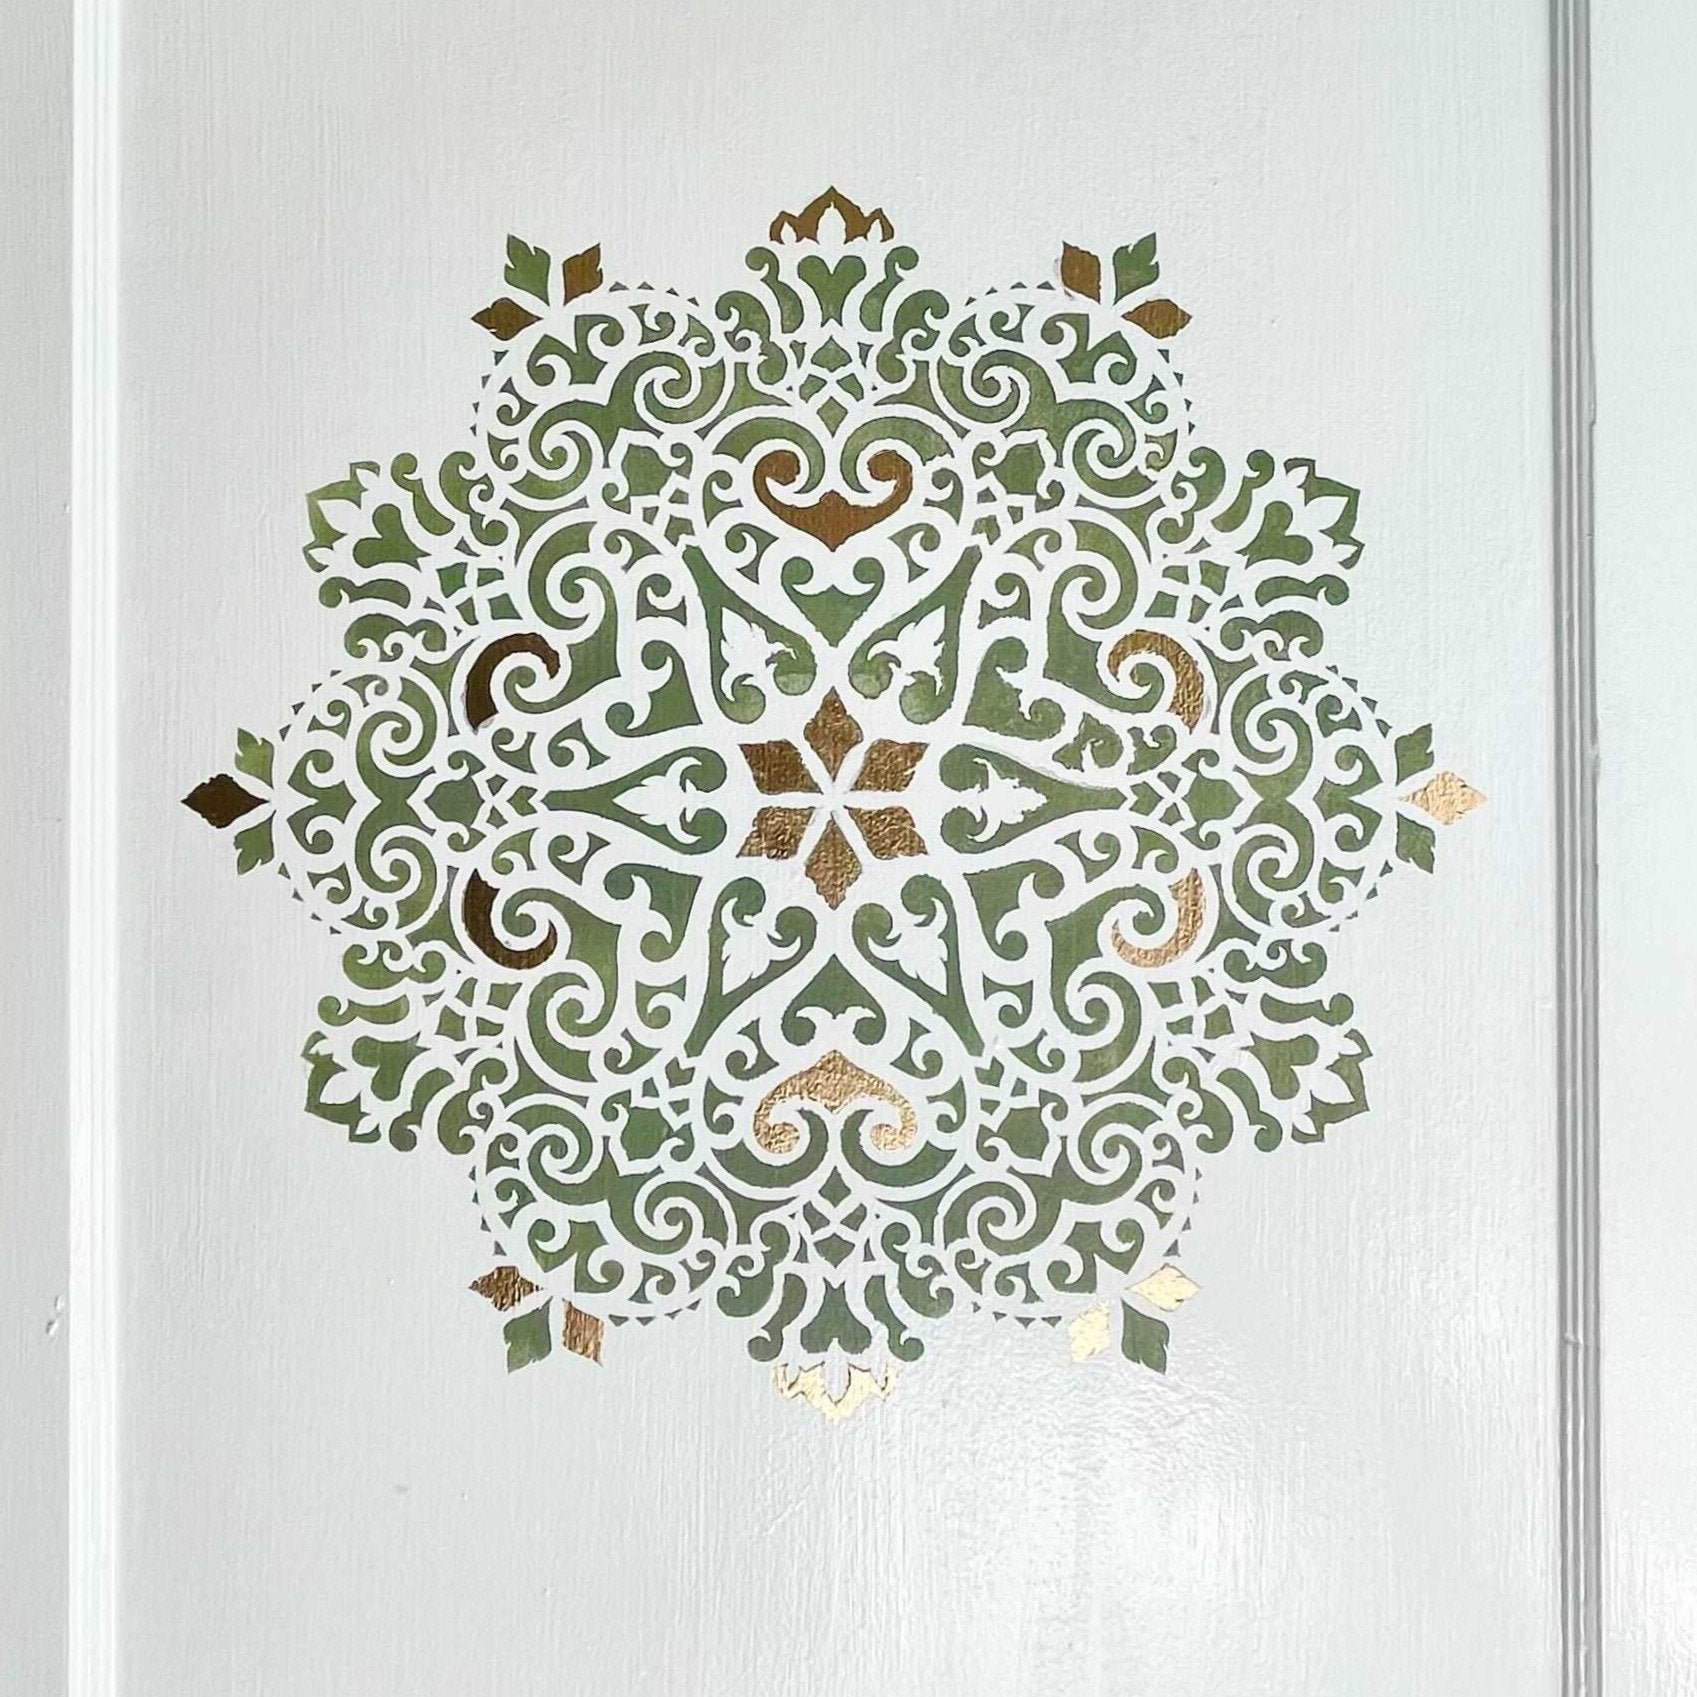 intricate mandala design painted on wall using paint stencil